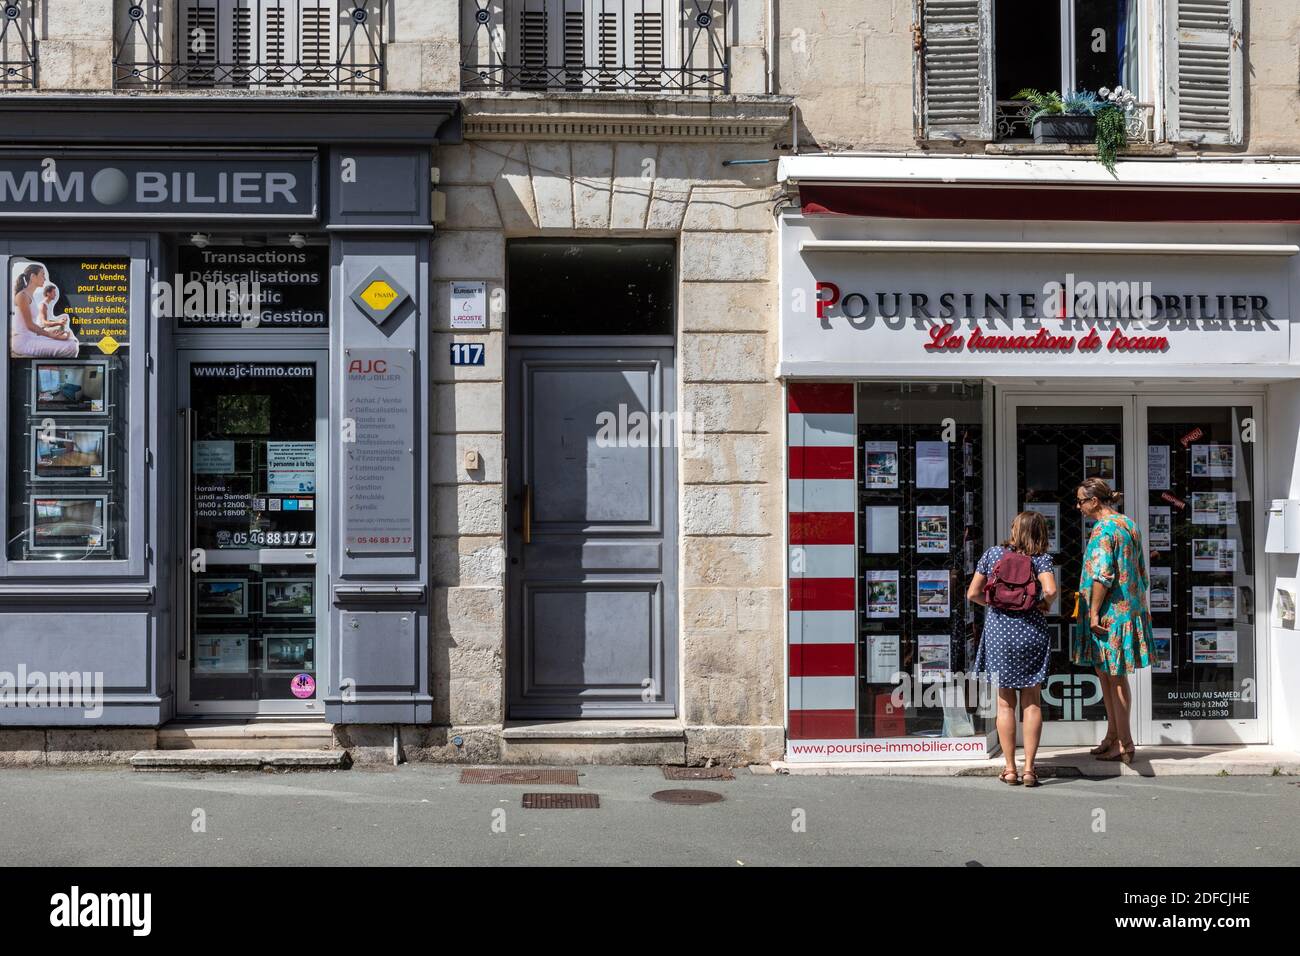 PASSER-BY IN FRONT OF THE STOREFRONT WITH REAL ESTATE ADS, REAL ESTATE AGENCY FOR RENTALS, SALES AND MANAGEMENT, ROCHEFORT, CHARENTE-MARITIME, FRANCE Stock Photo